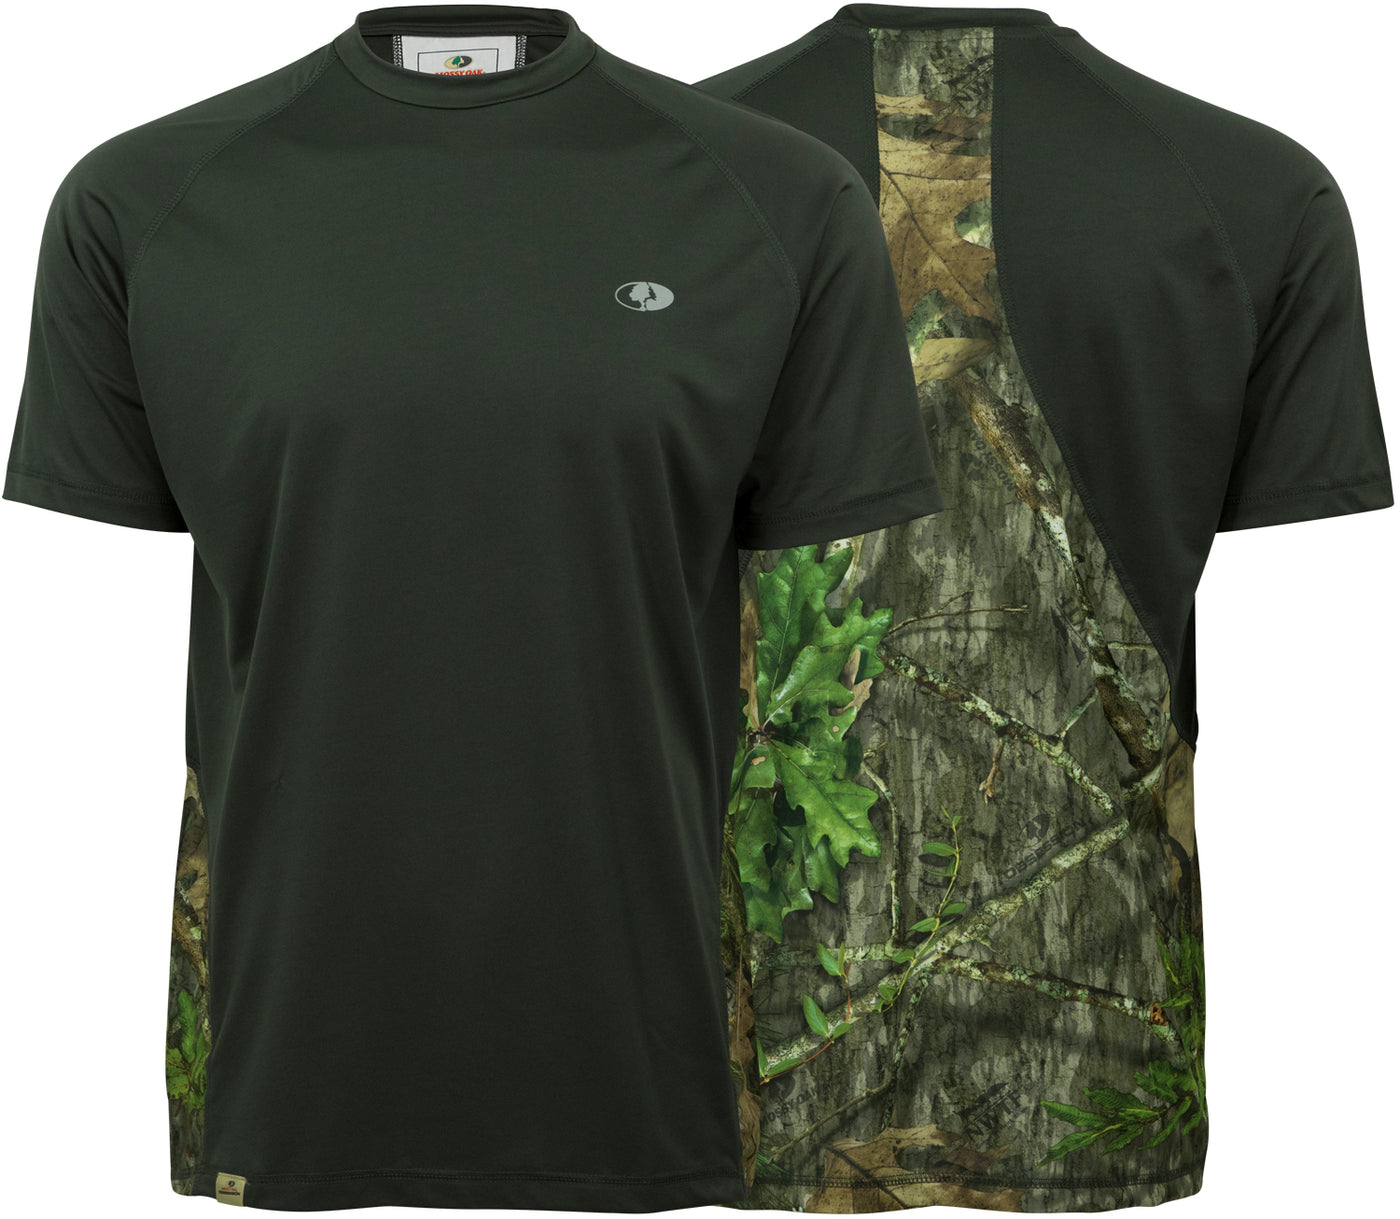 Mossy Oak Performance Field Short Sleeve Tech Tee Raven and Obsession Front and Back